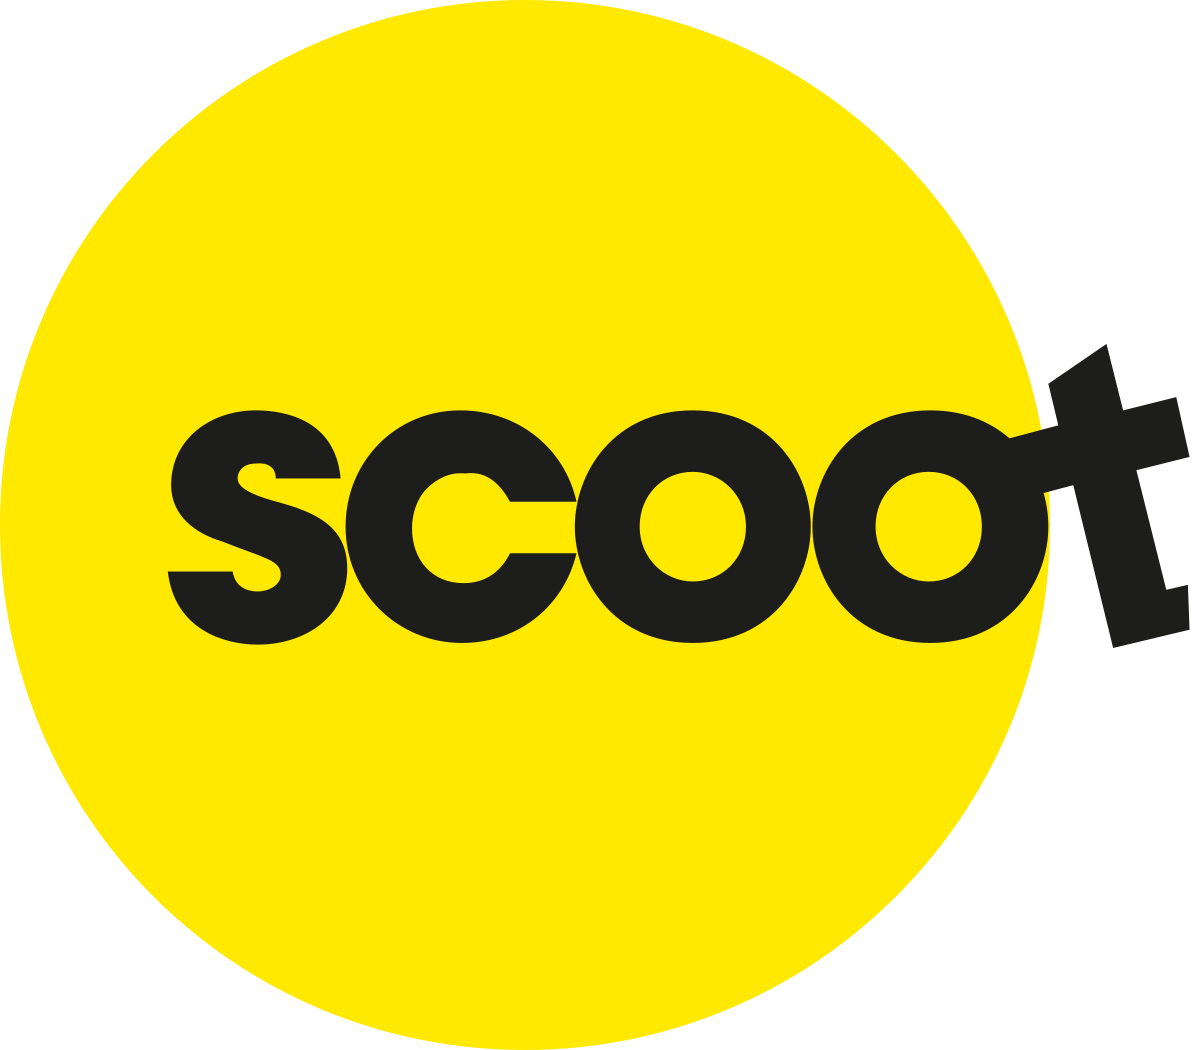 Our clients include Scoot Tiger Air